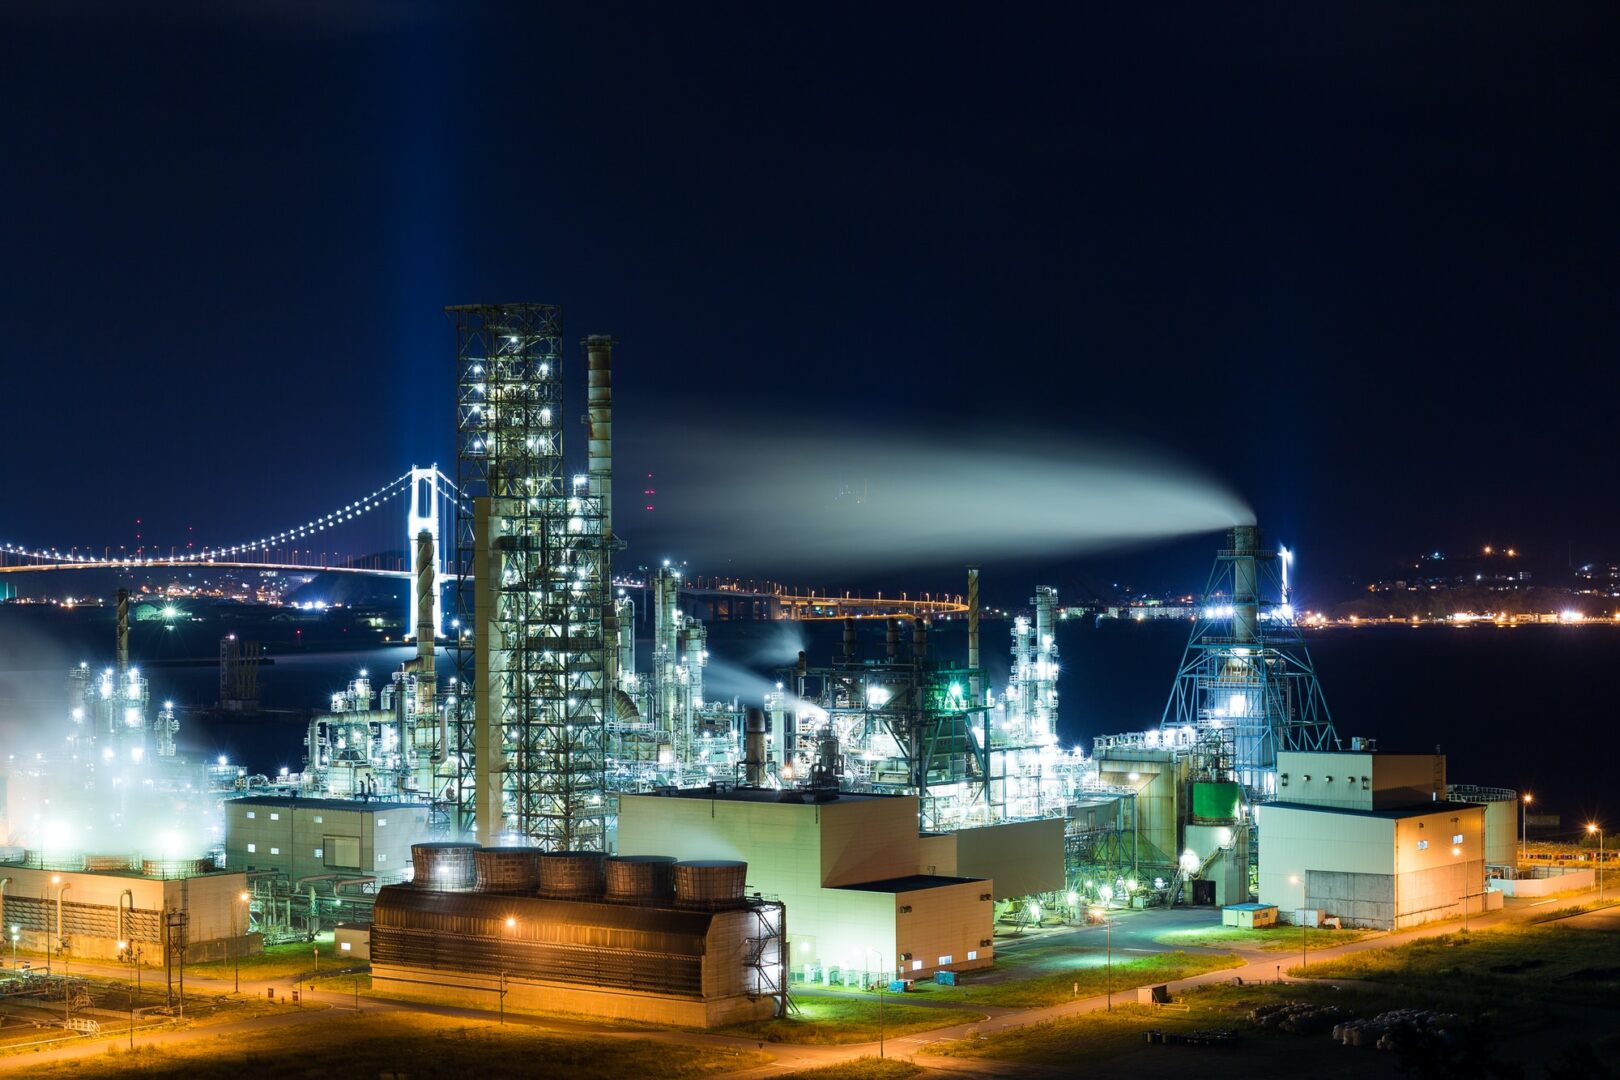 A large oil refinery at night with lights on.